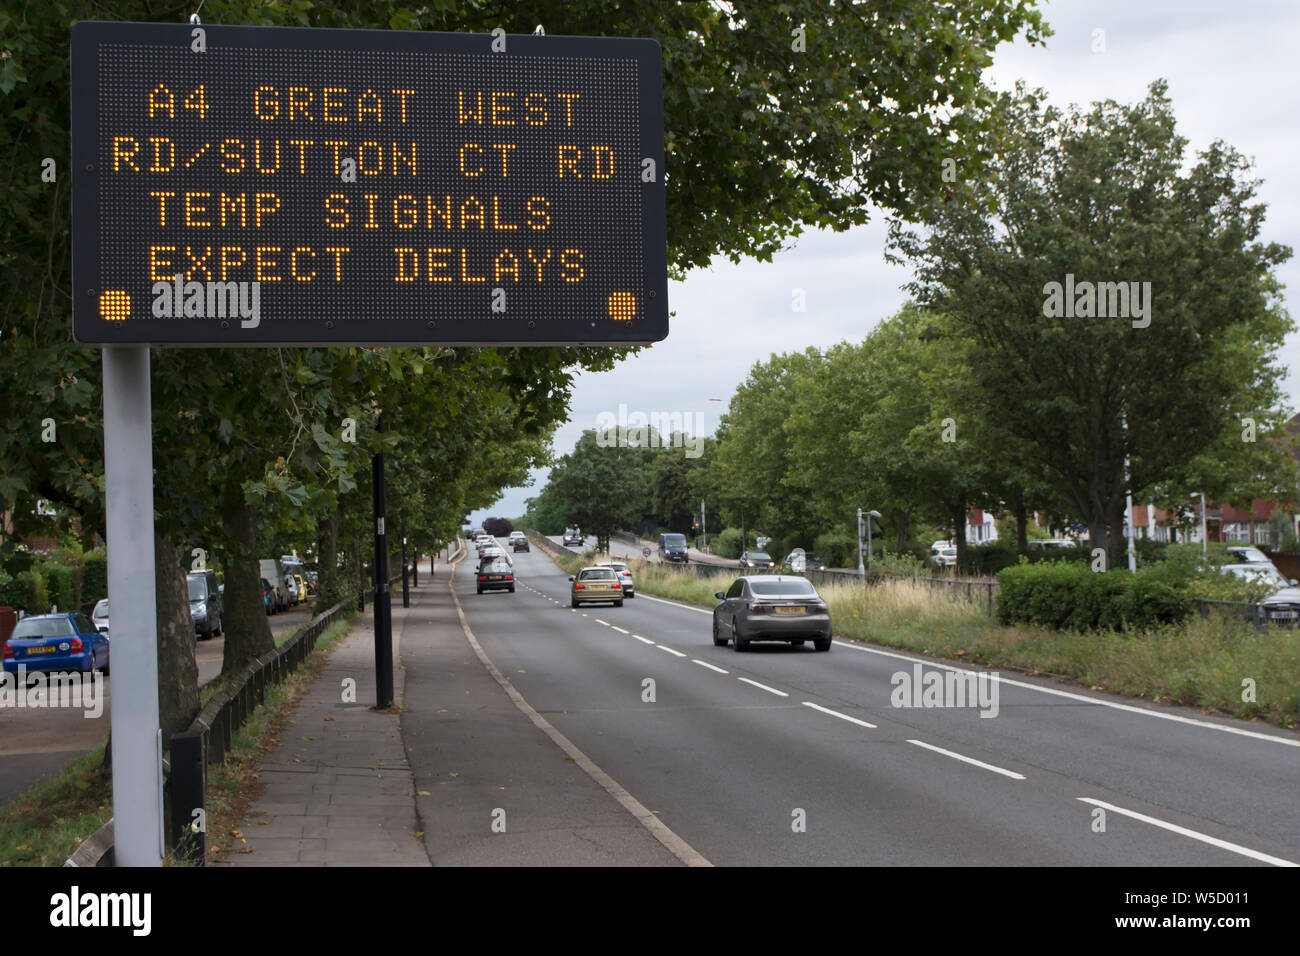 temporary british road sign warning of temporary signals and expected delays on the a4 great west road, in london, england Stock Photo